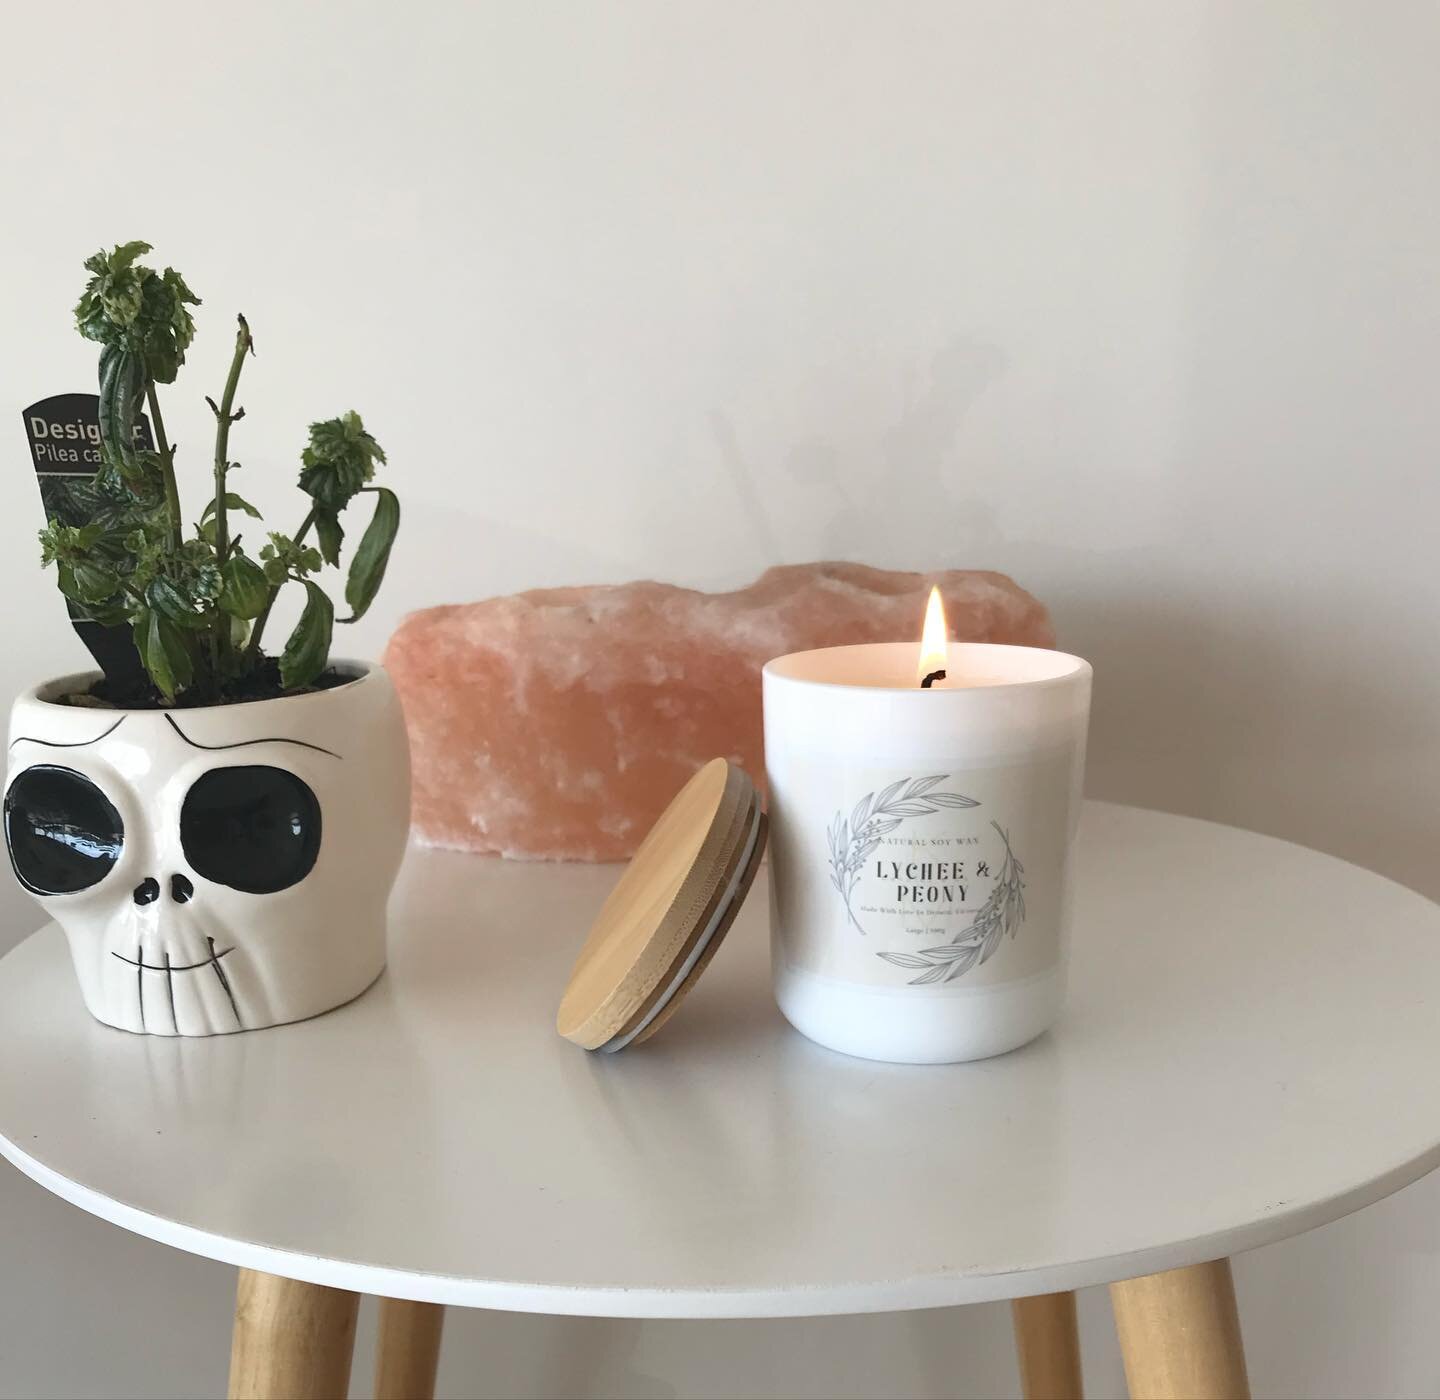 Lychee and peach @k.m.candlesandco 🤤 
.
.
.
#candles#lychee&amp;peach#soywaxcandles#smallbusiness#smallbusinessaustralia#supportsmallbusiness#groundedtherapies#mind#body#soul#melbourne